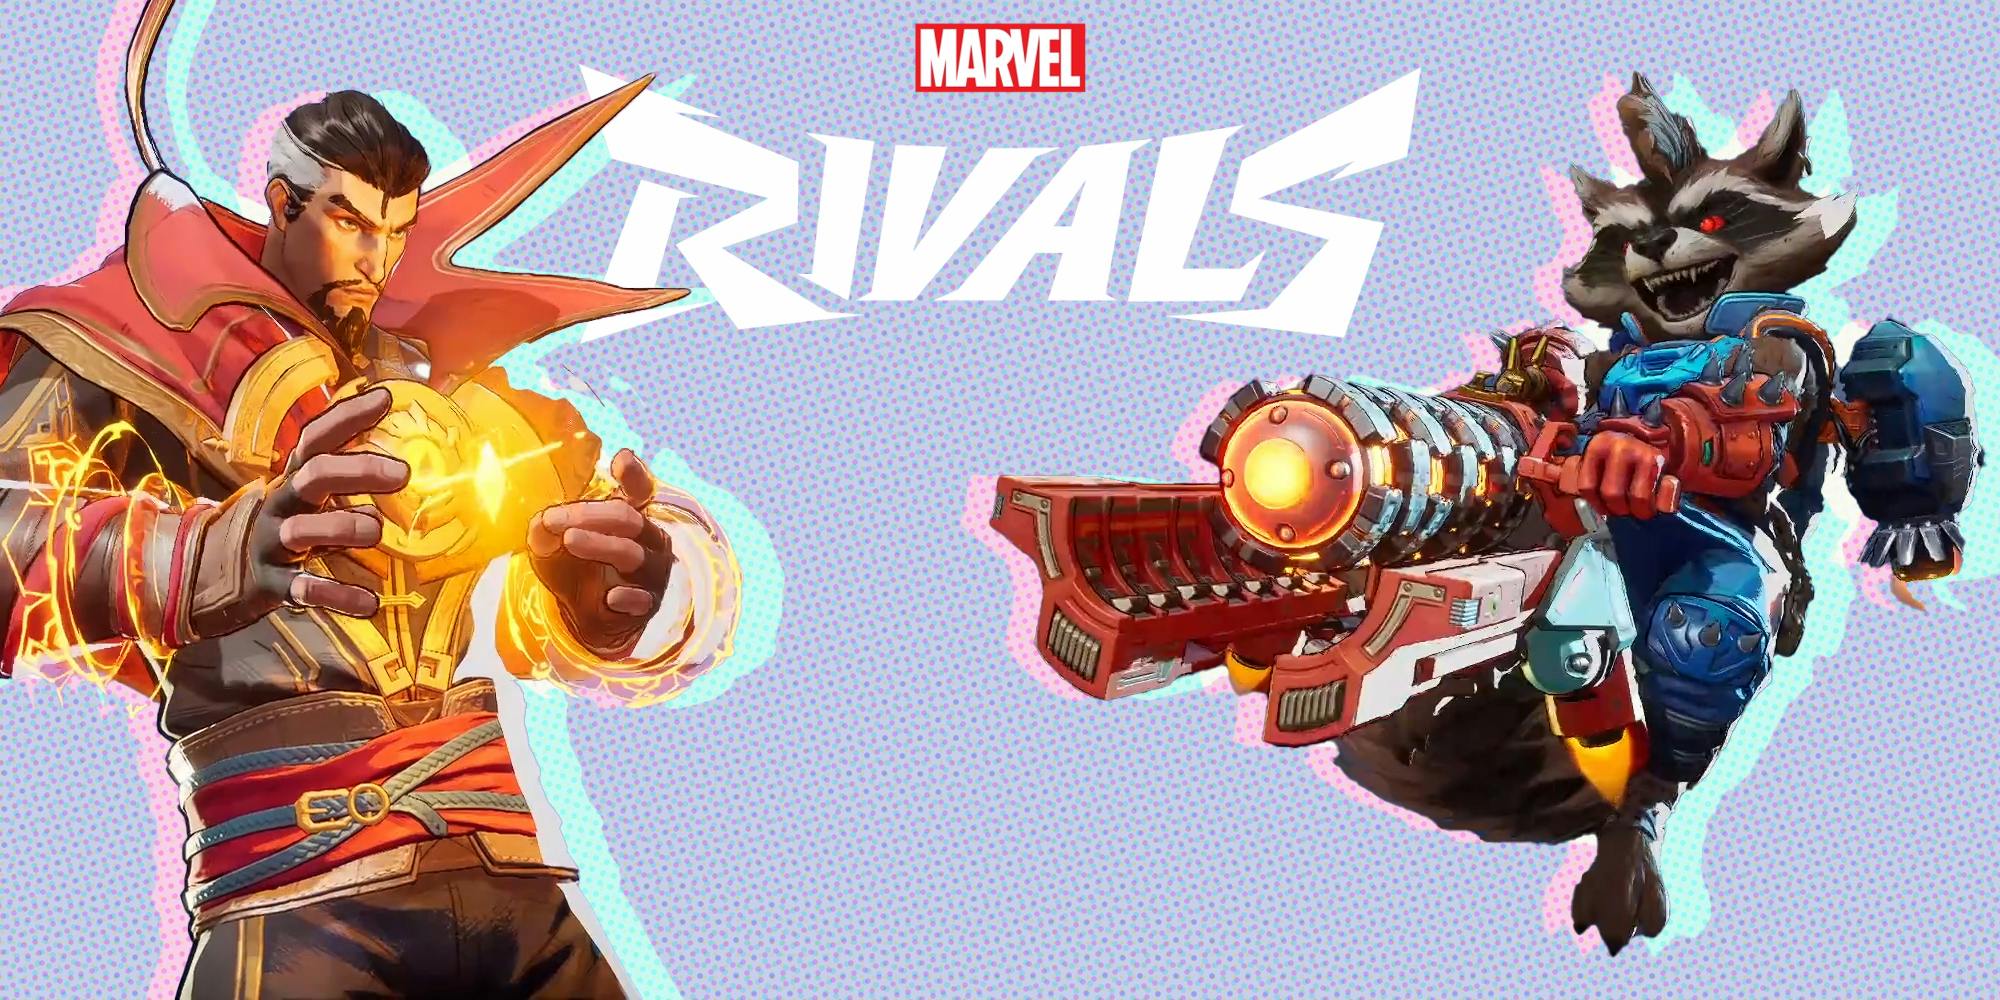 marvel rivals logo next to video game characters